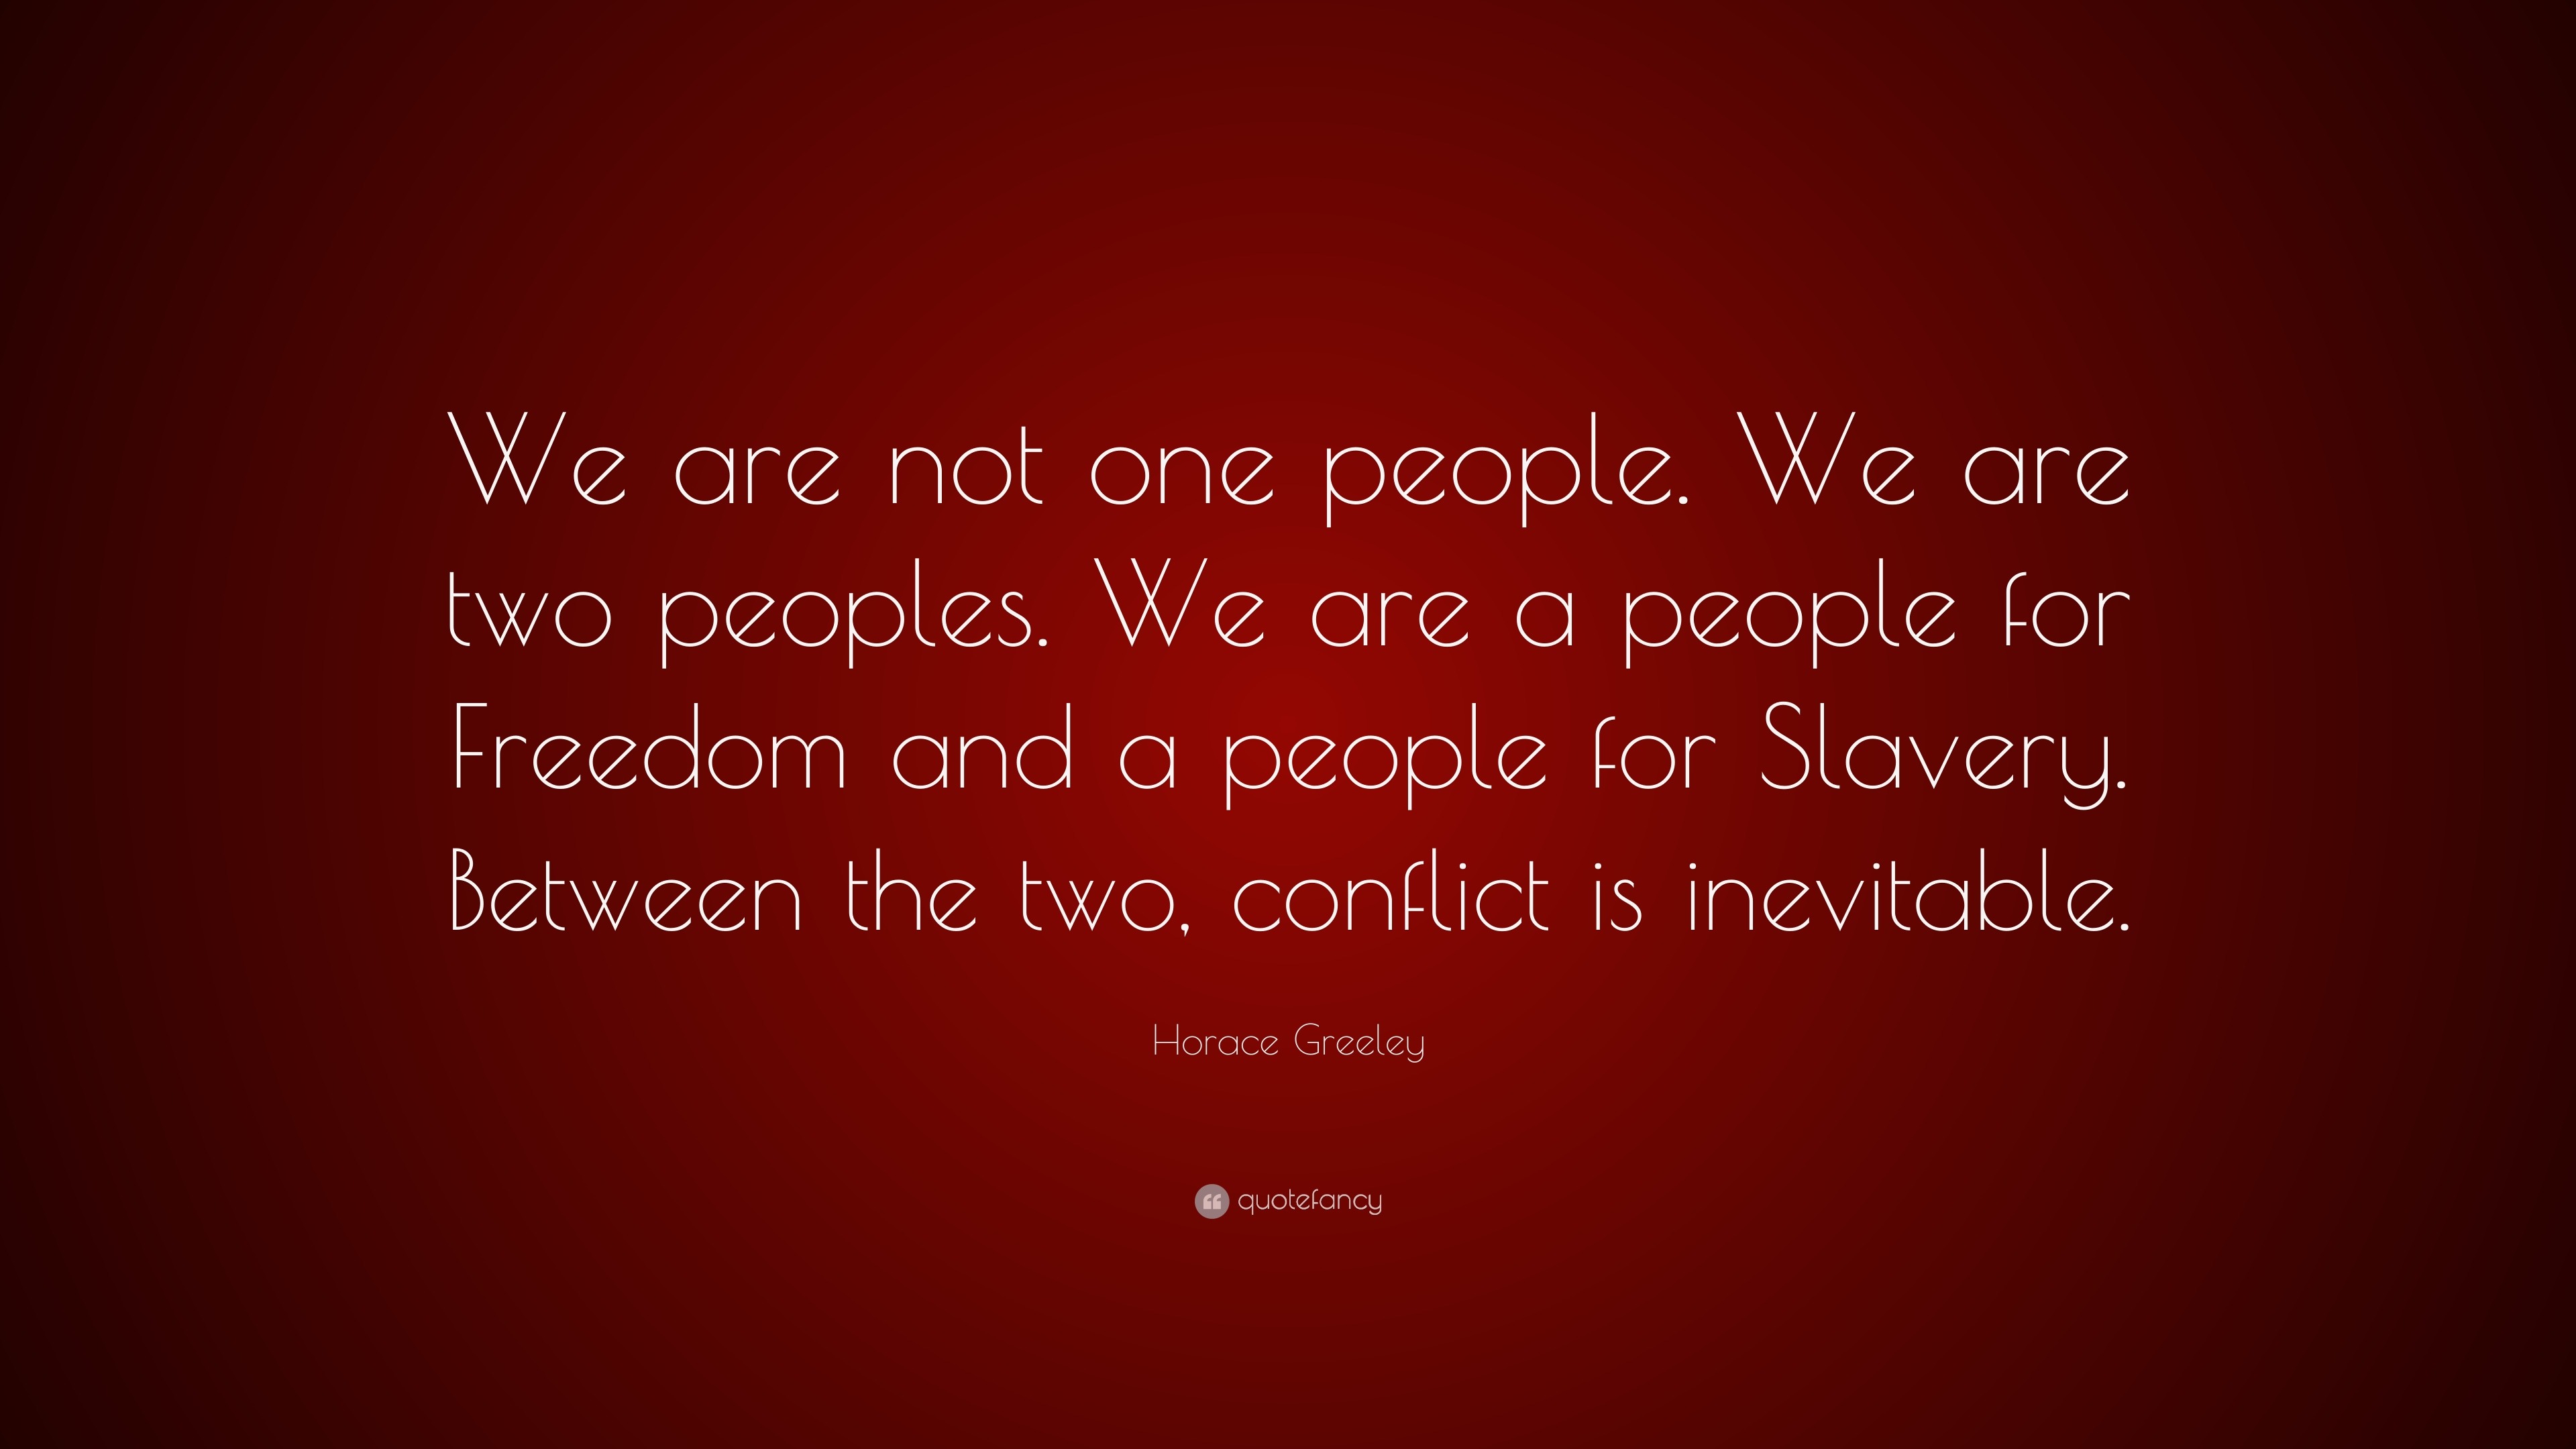 Horace Greeley Quote: “We are not one people. We are two peoples. We